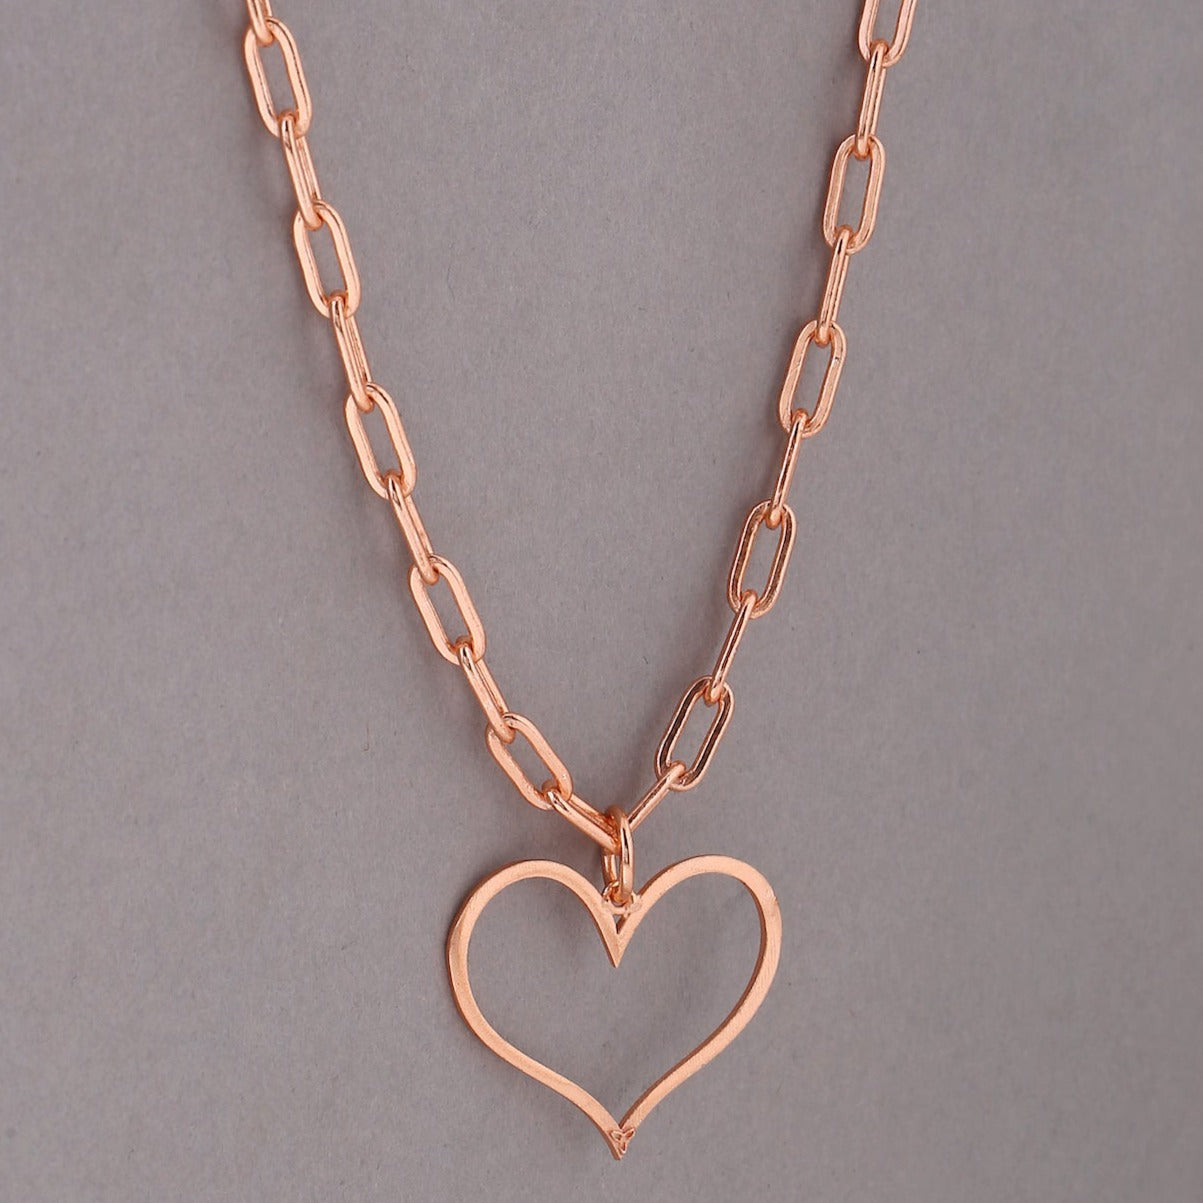 Happy Heart Necklace - Rose Gold